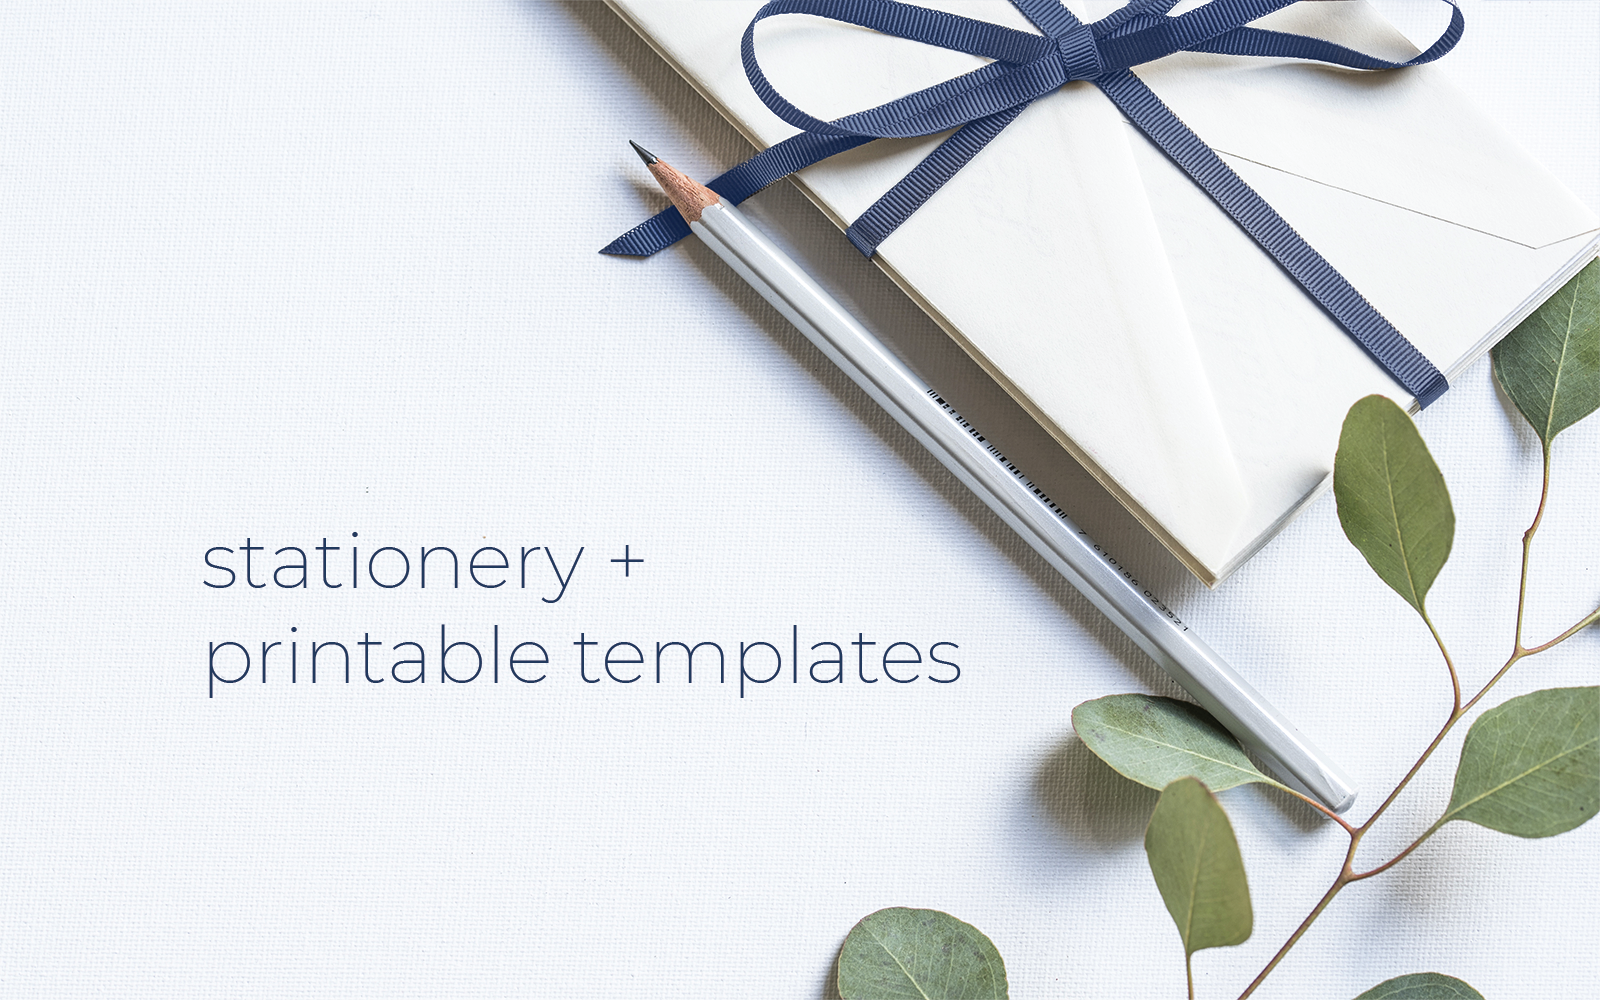 stationery or printable templates